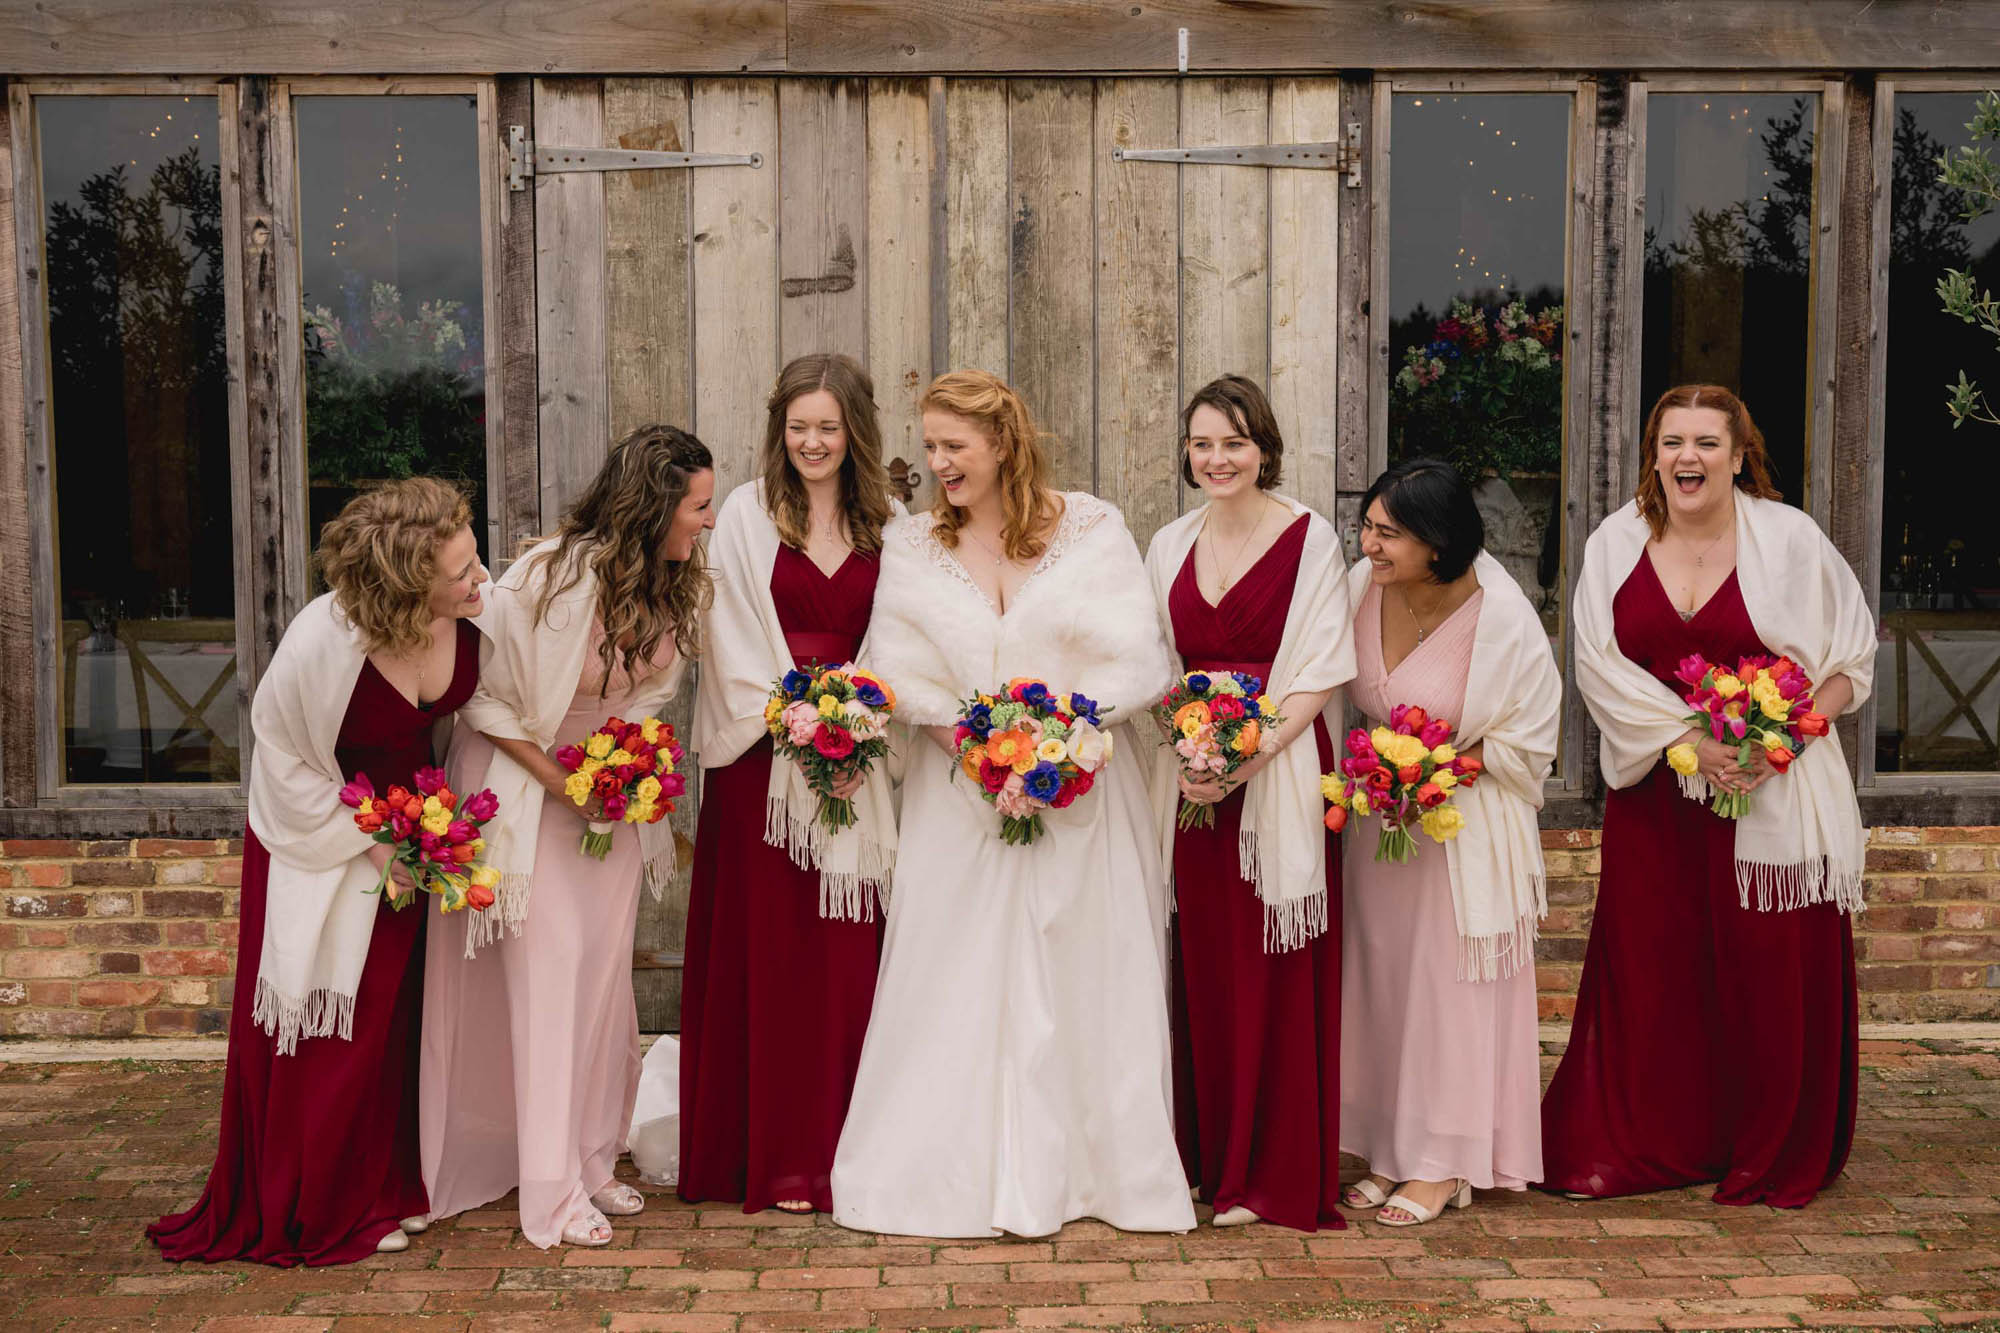 Bride and her bridesmaids laughing Bride and groom hug closely on their wedding day at High Billinghurst Farm in Surrey.